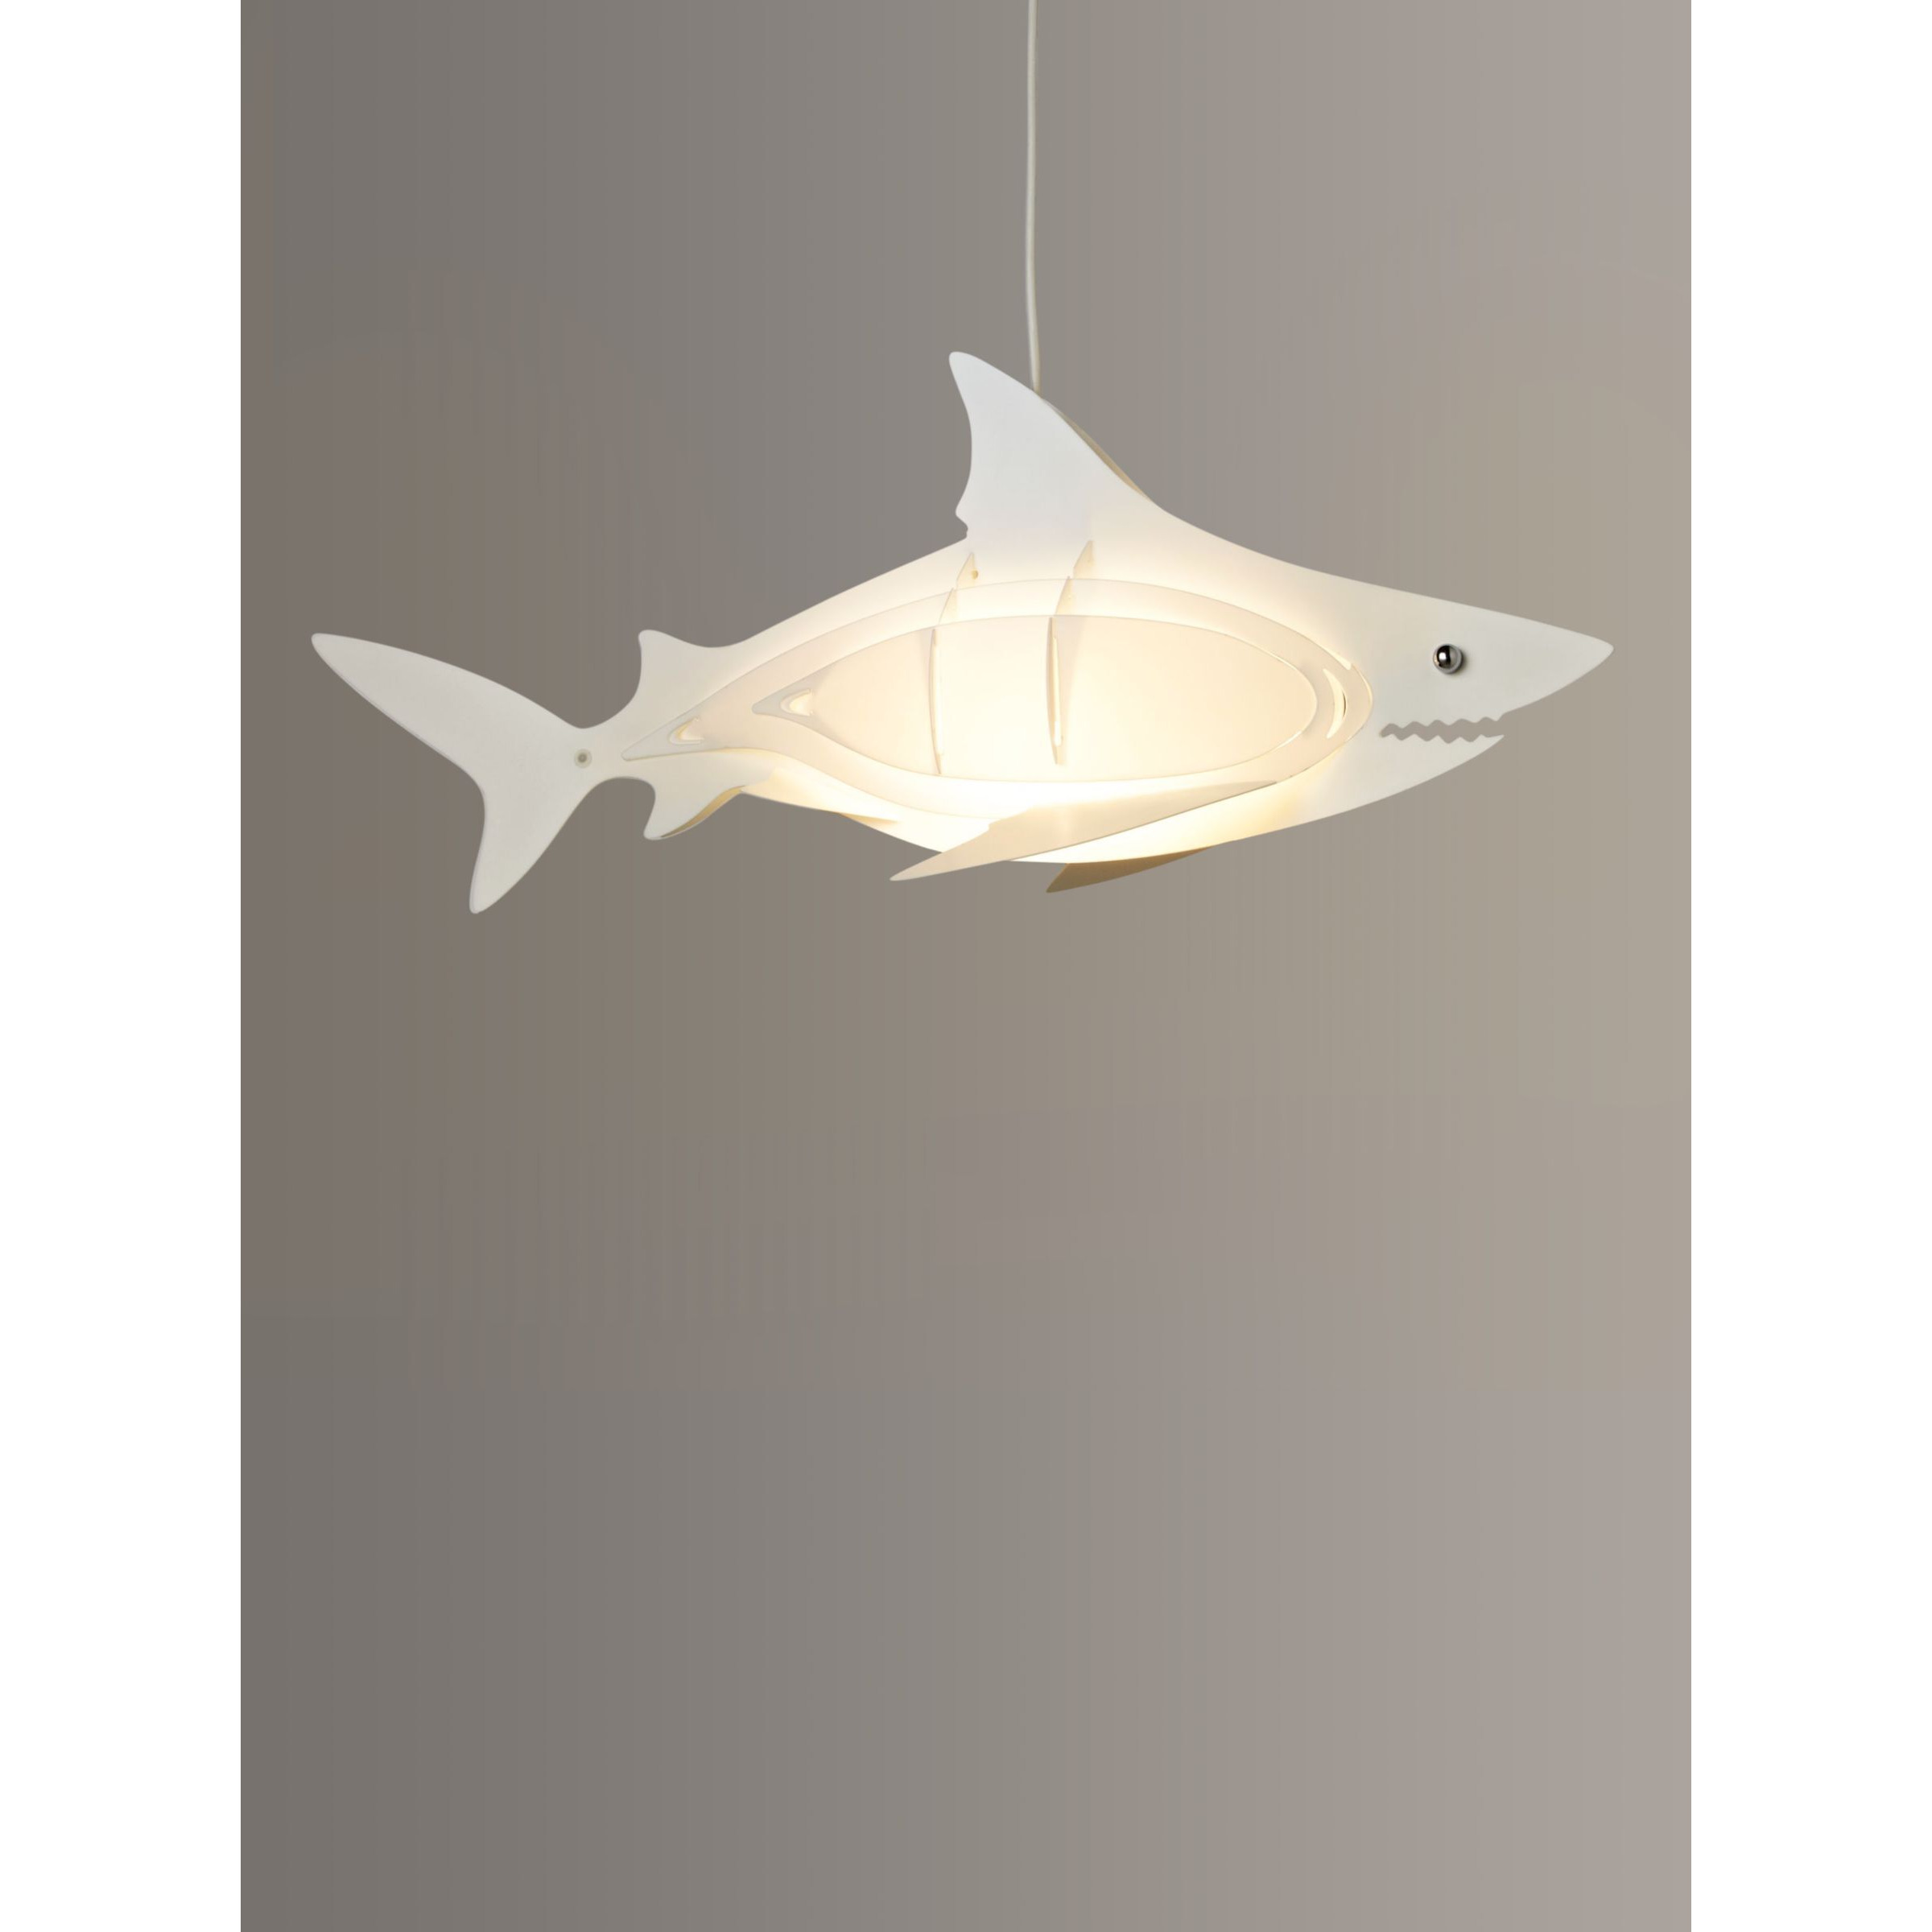 John Lewis Easy-to-fit Shark Ceiling Shade - image 1